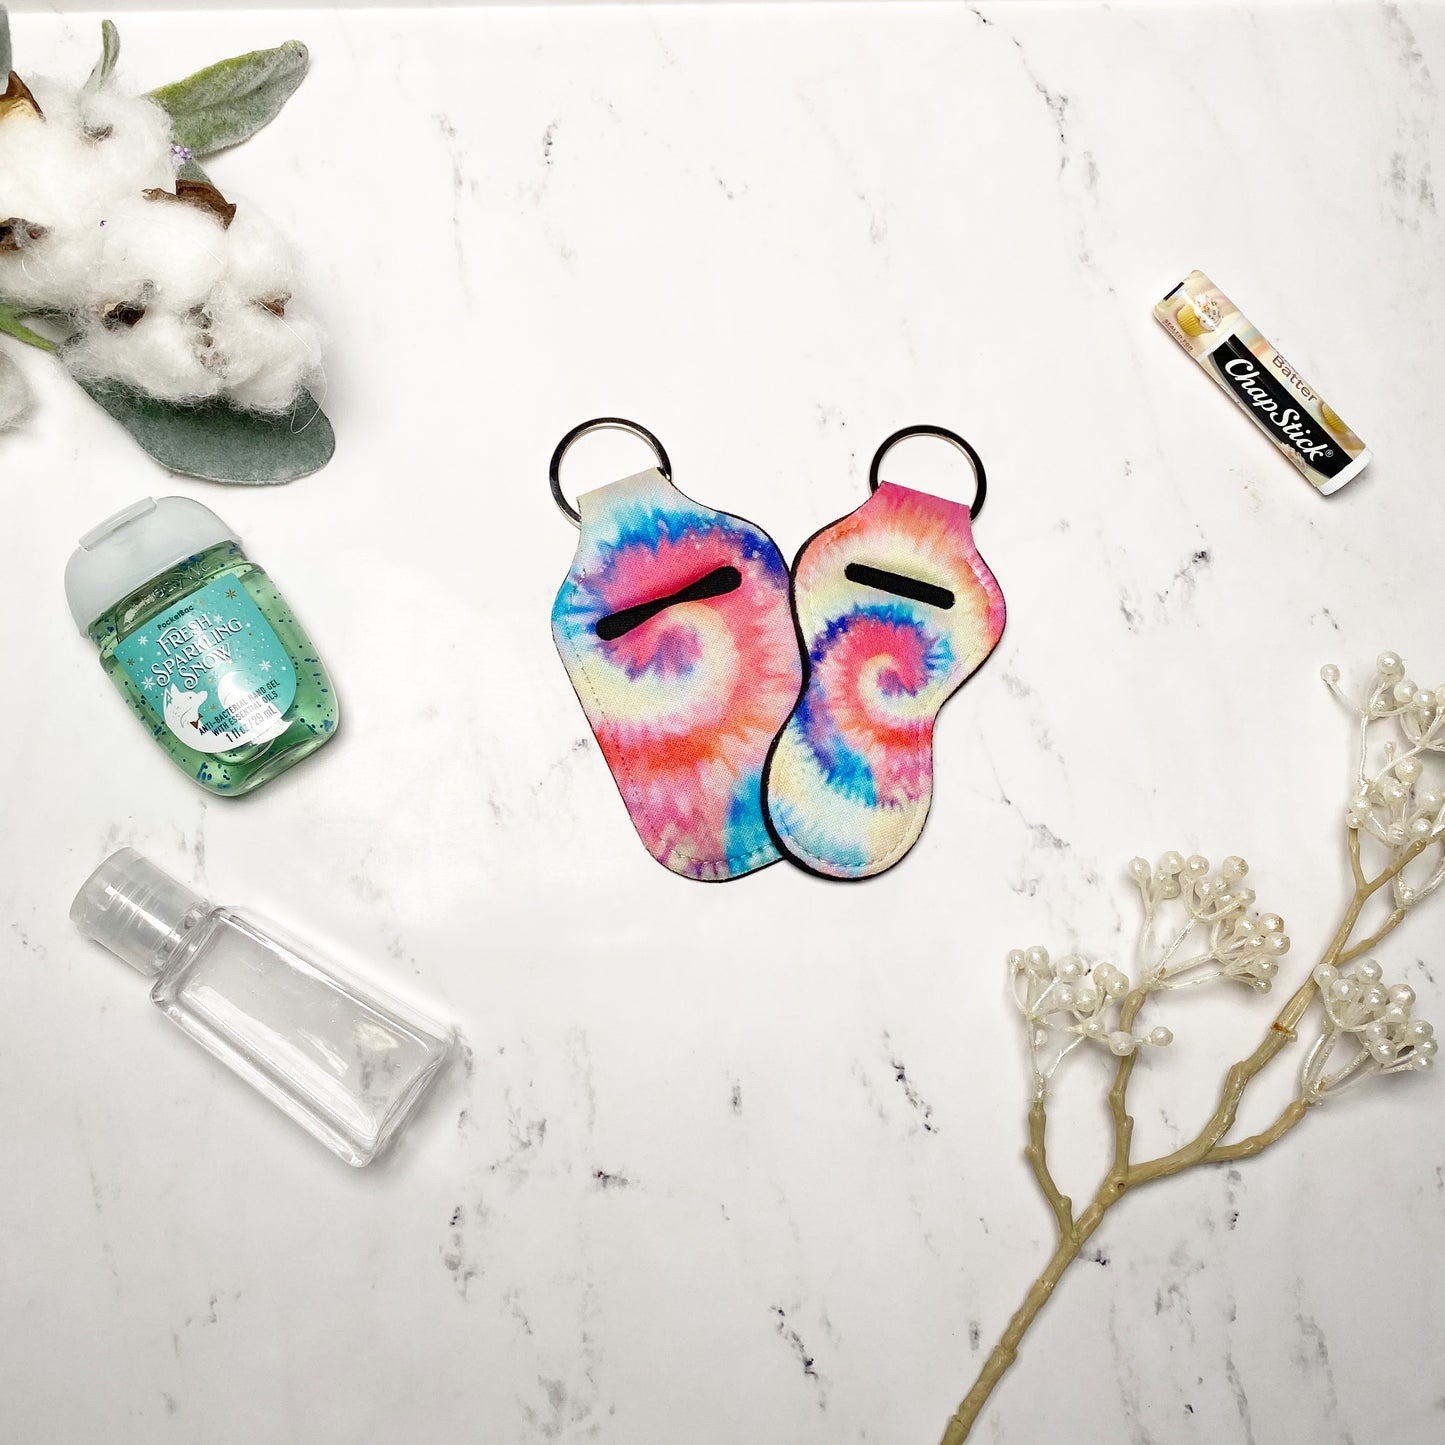 Tie Dye Lip Balm and Hand Sanitizer Holders